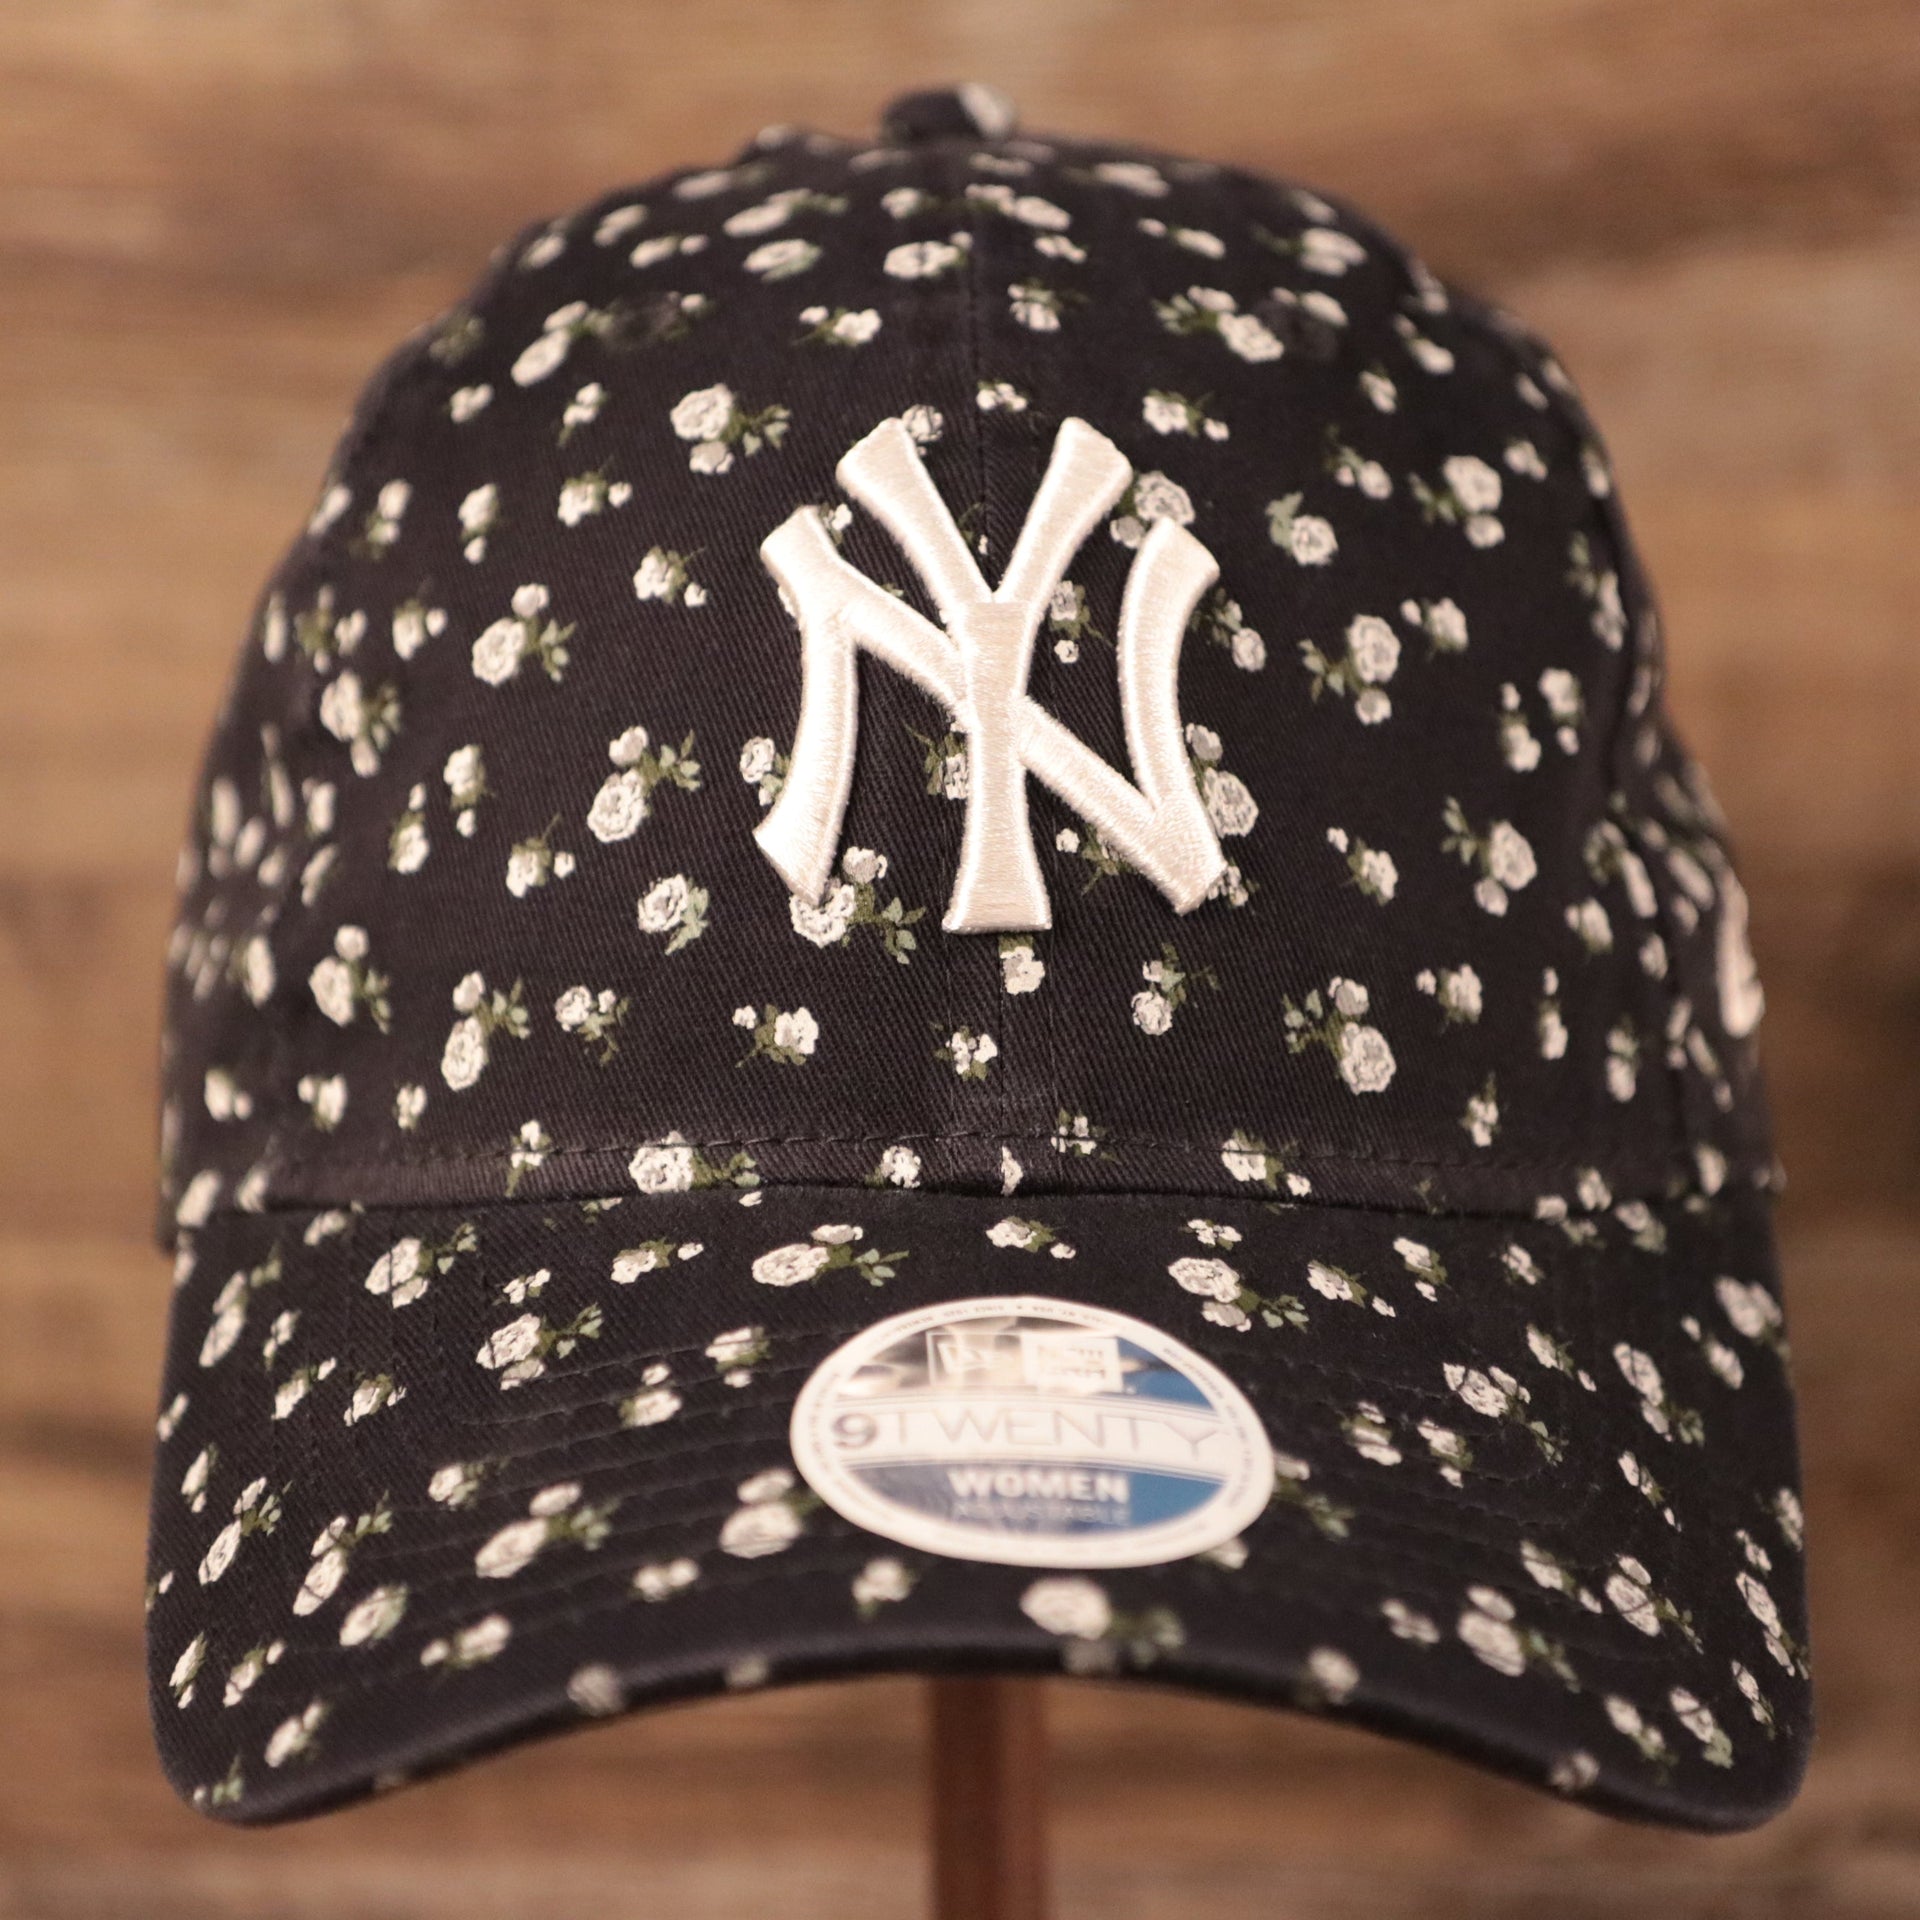 The New York Yankees logo patch on the front side of the New Era floral baseball cap.